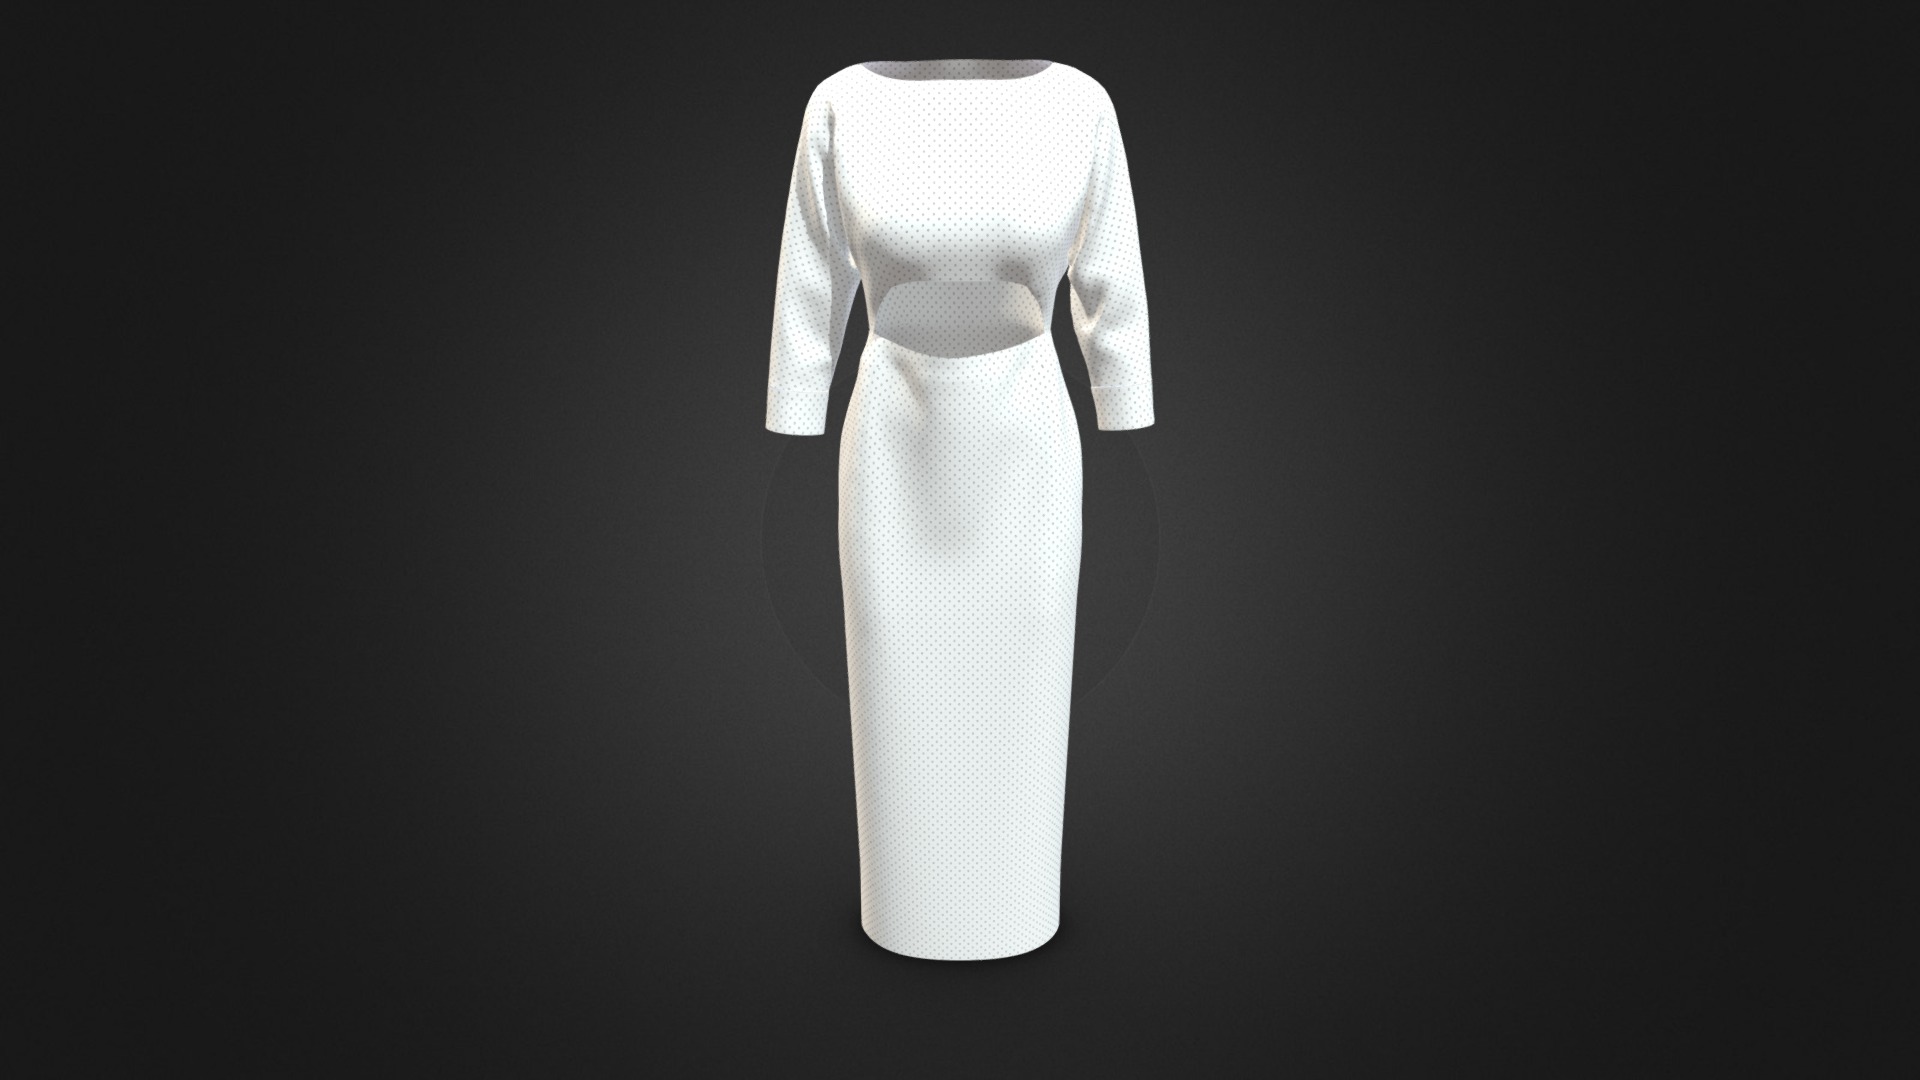 3D model Boat Neck Tie Dress - This is a 3D model of the Boat Neck Tie Dress. The 3D model is about a white dress on a black background.